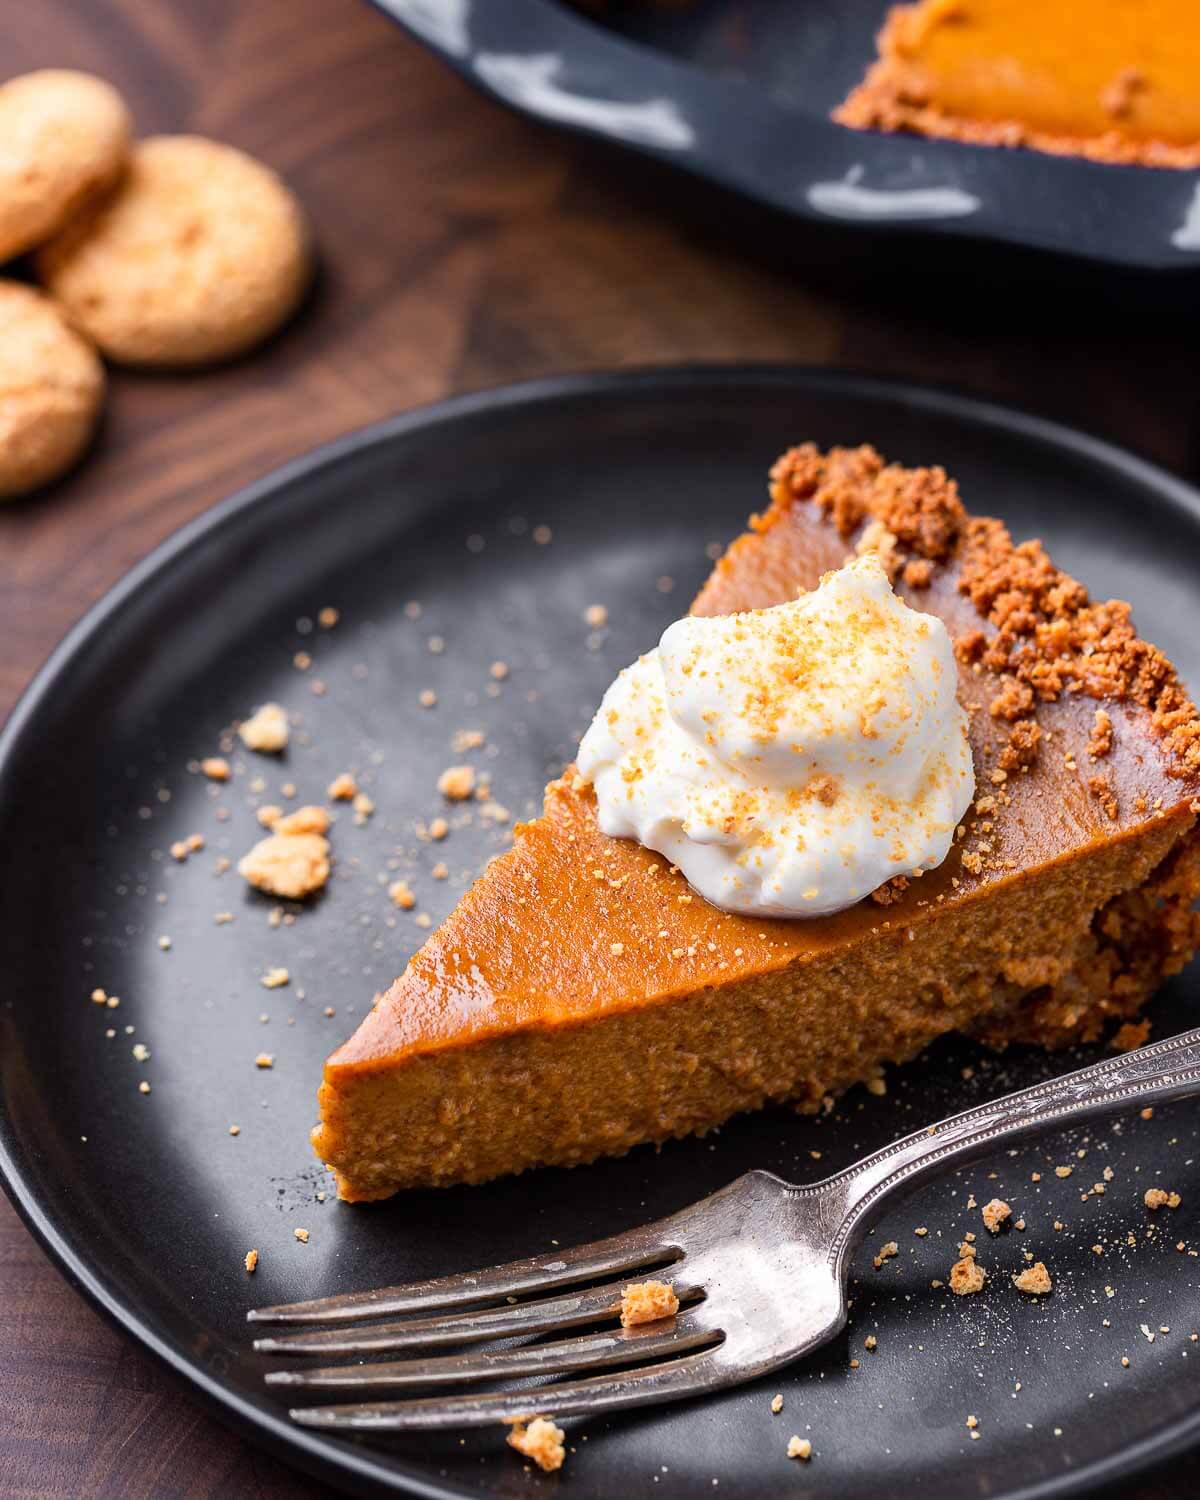 Slice of pumpkin pie with whip cream and crumbled amaretti cookies on black plate.